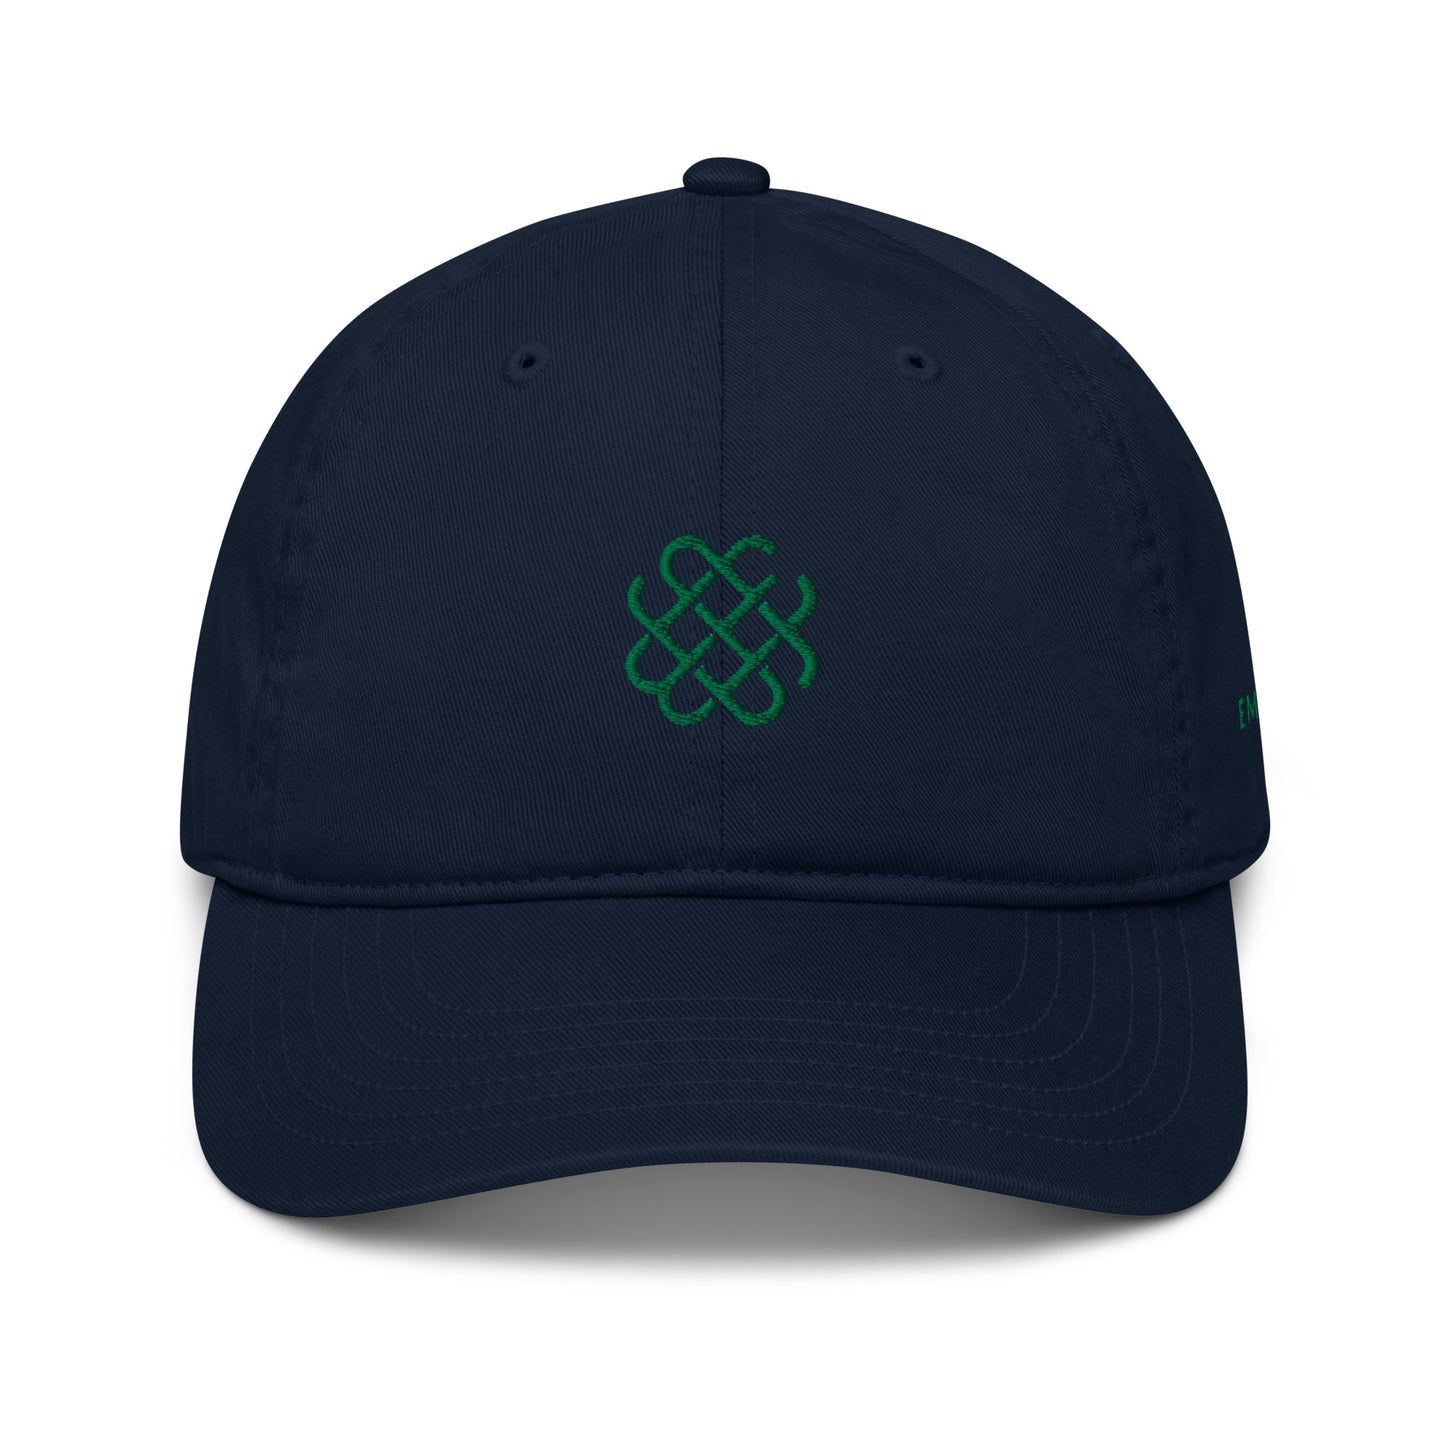 Emerald Stay - Green Icon embroidered - Organic hat